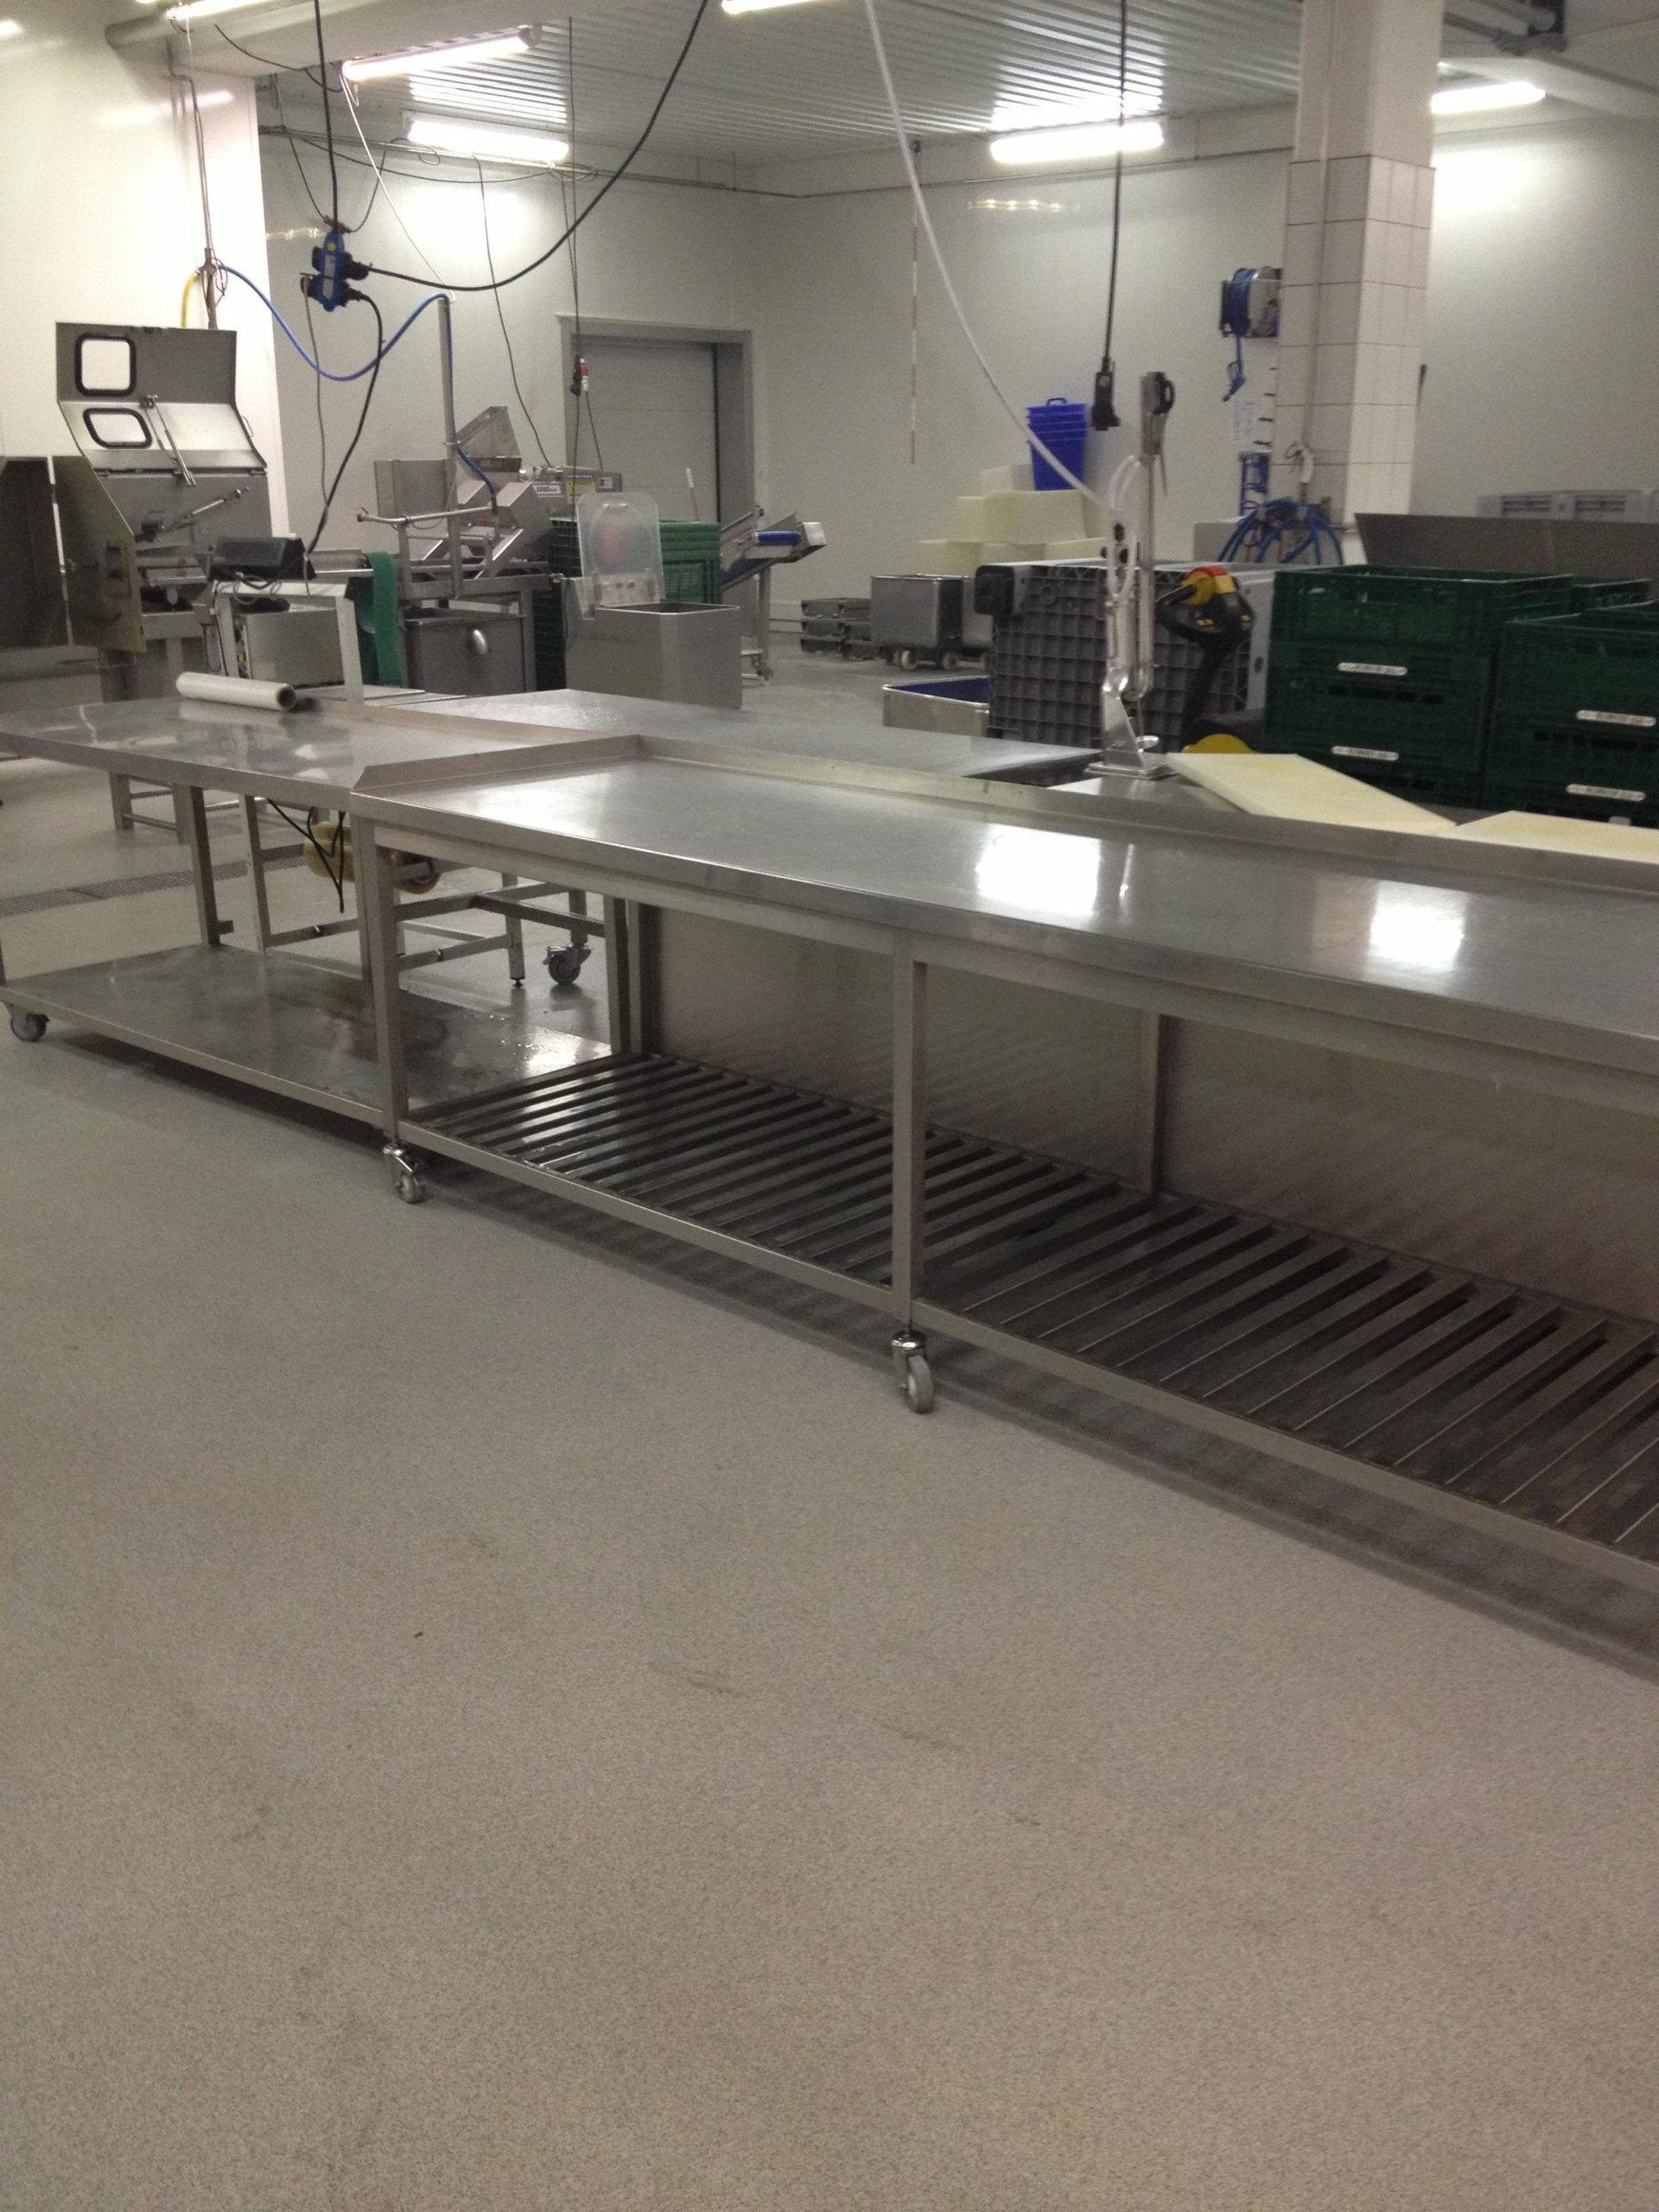 Urethane Concrete for Food Processing Facilities | Duraamen Engineered Products Inc